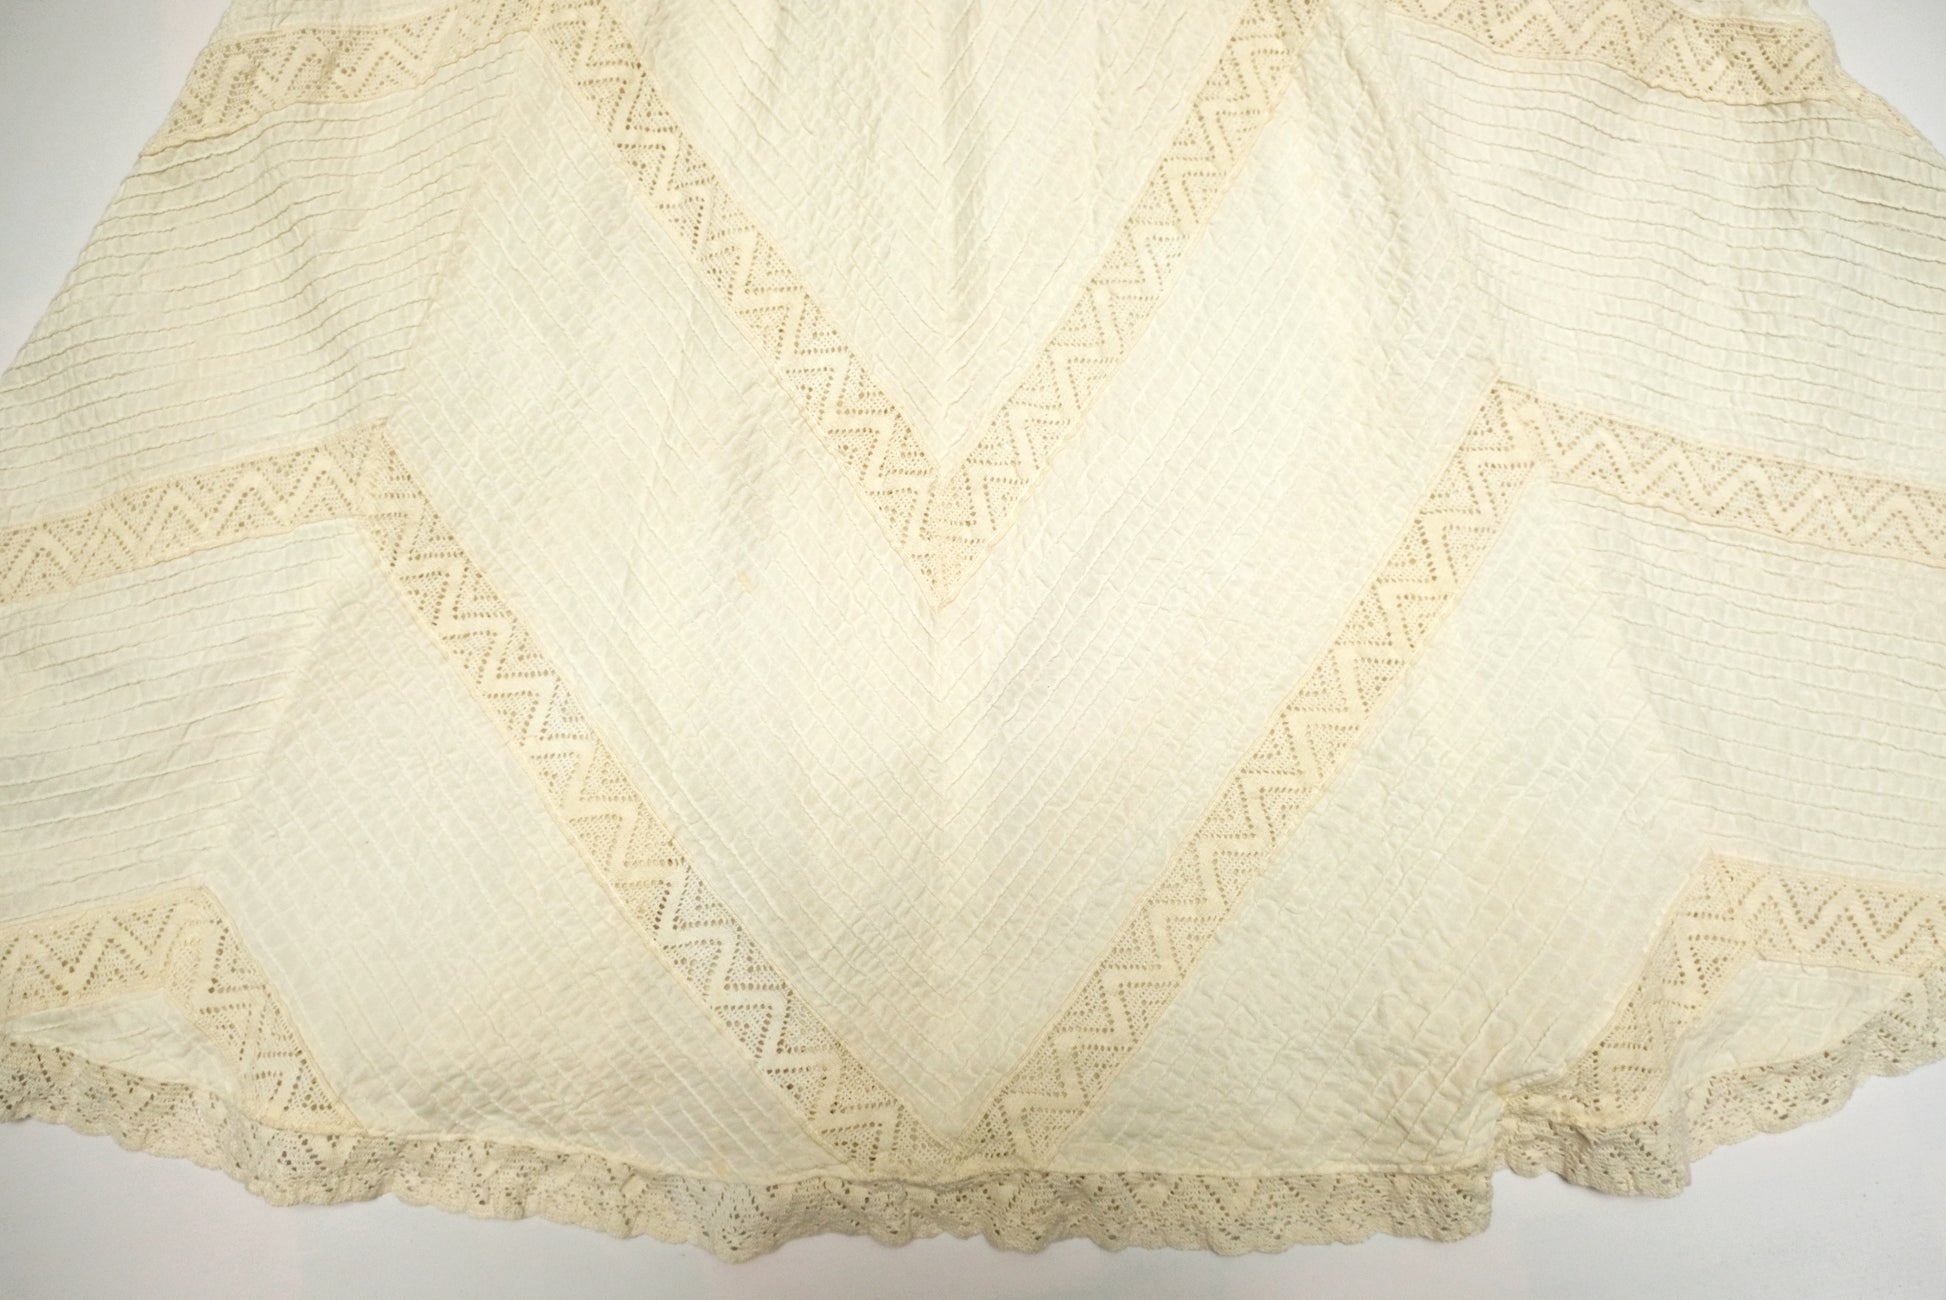 Vintage Mexicana of Sloane Street Cotton and Lace Wedding Dress, UK8-10